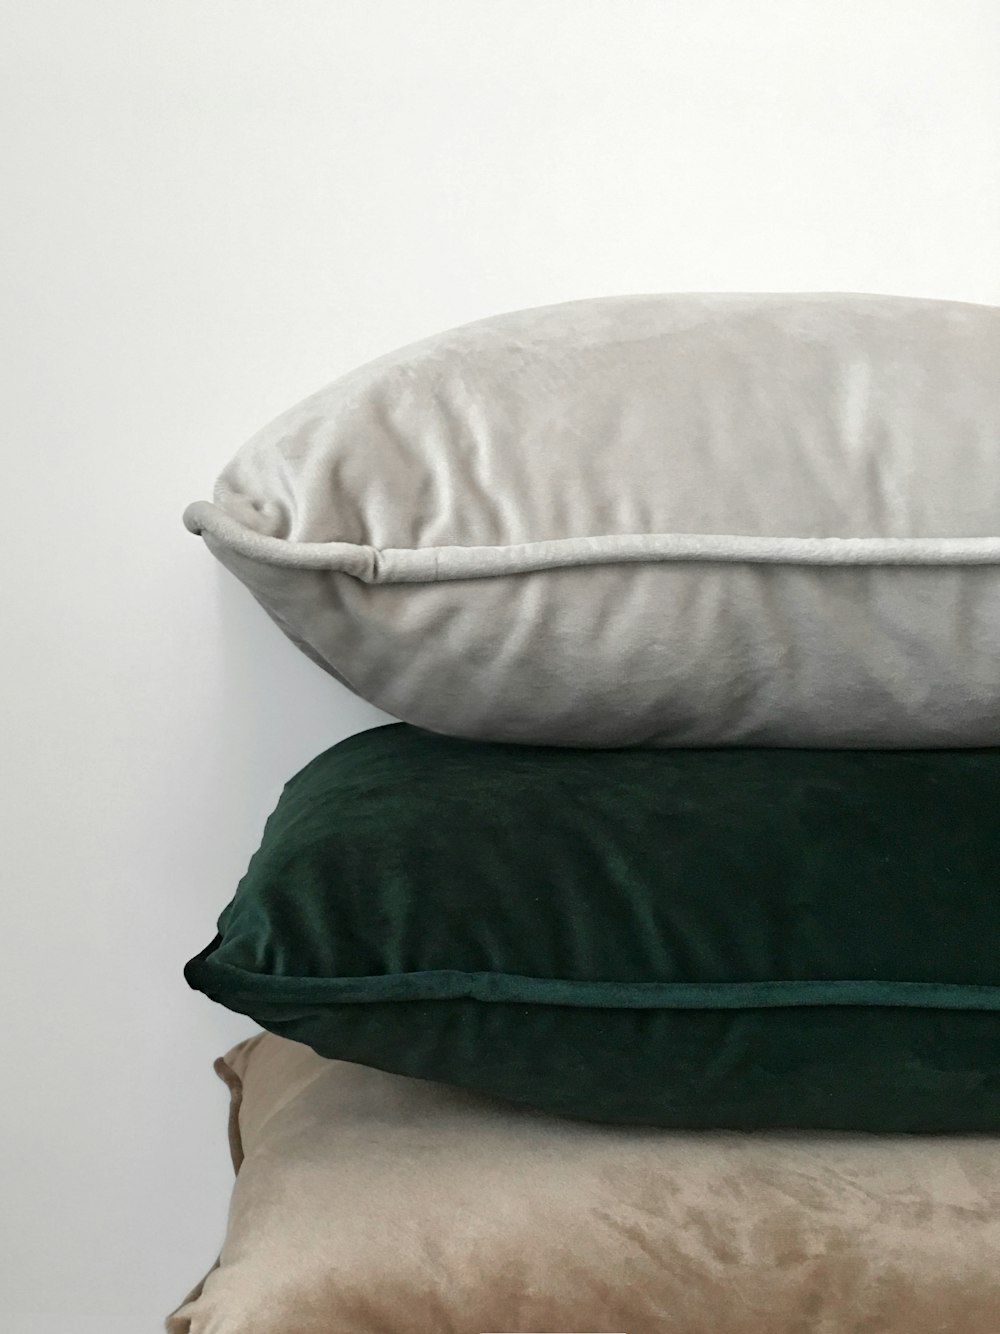 three assorted-color pillows